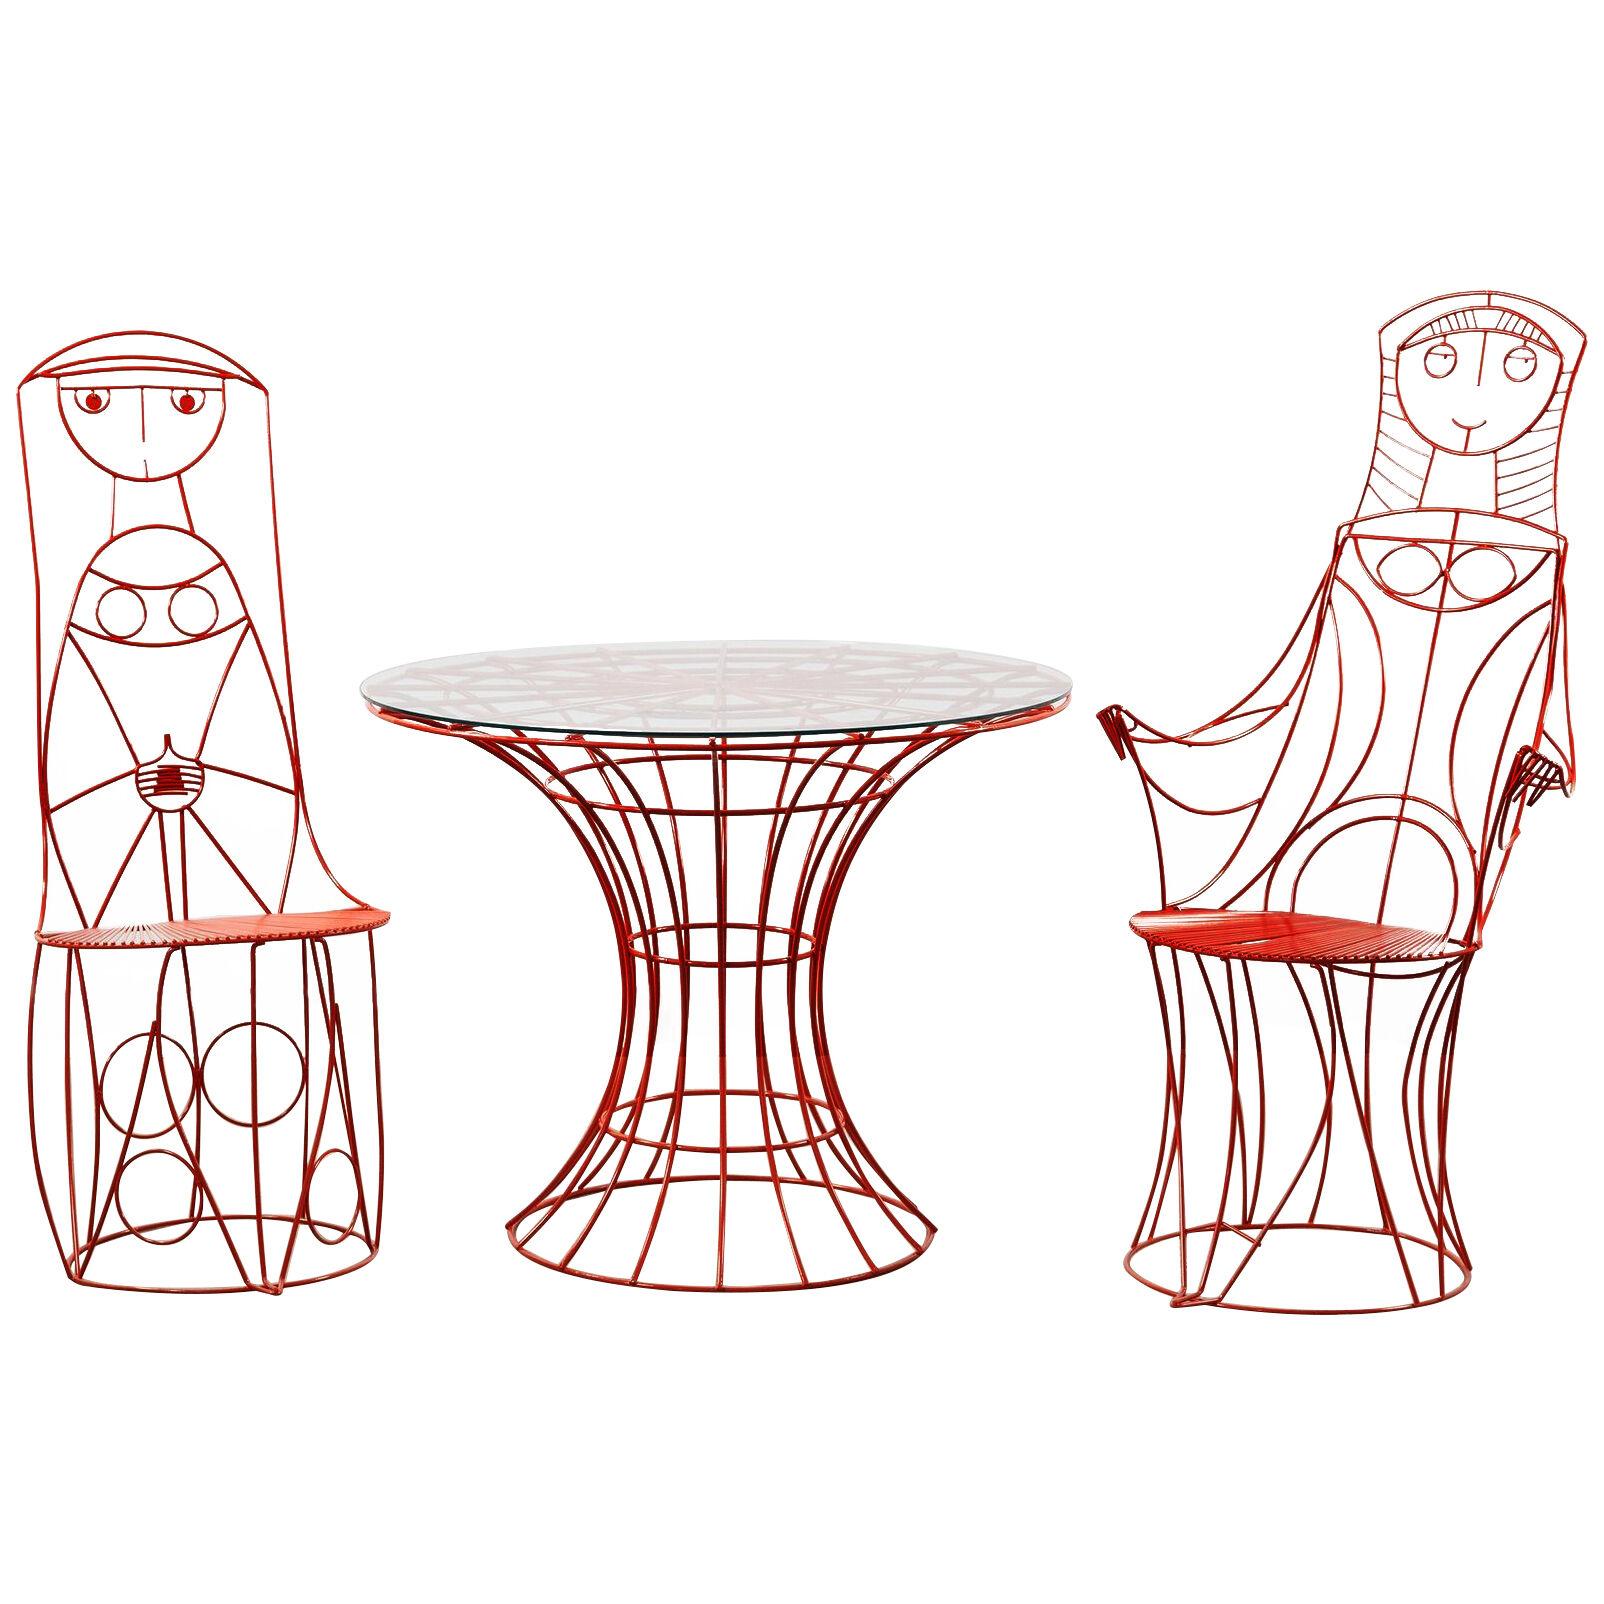 John Risley Sculptural Patio Set with Two Lady Chairs and Wire Tulip Table 1960s